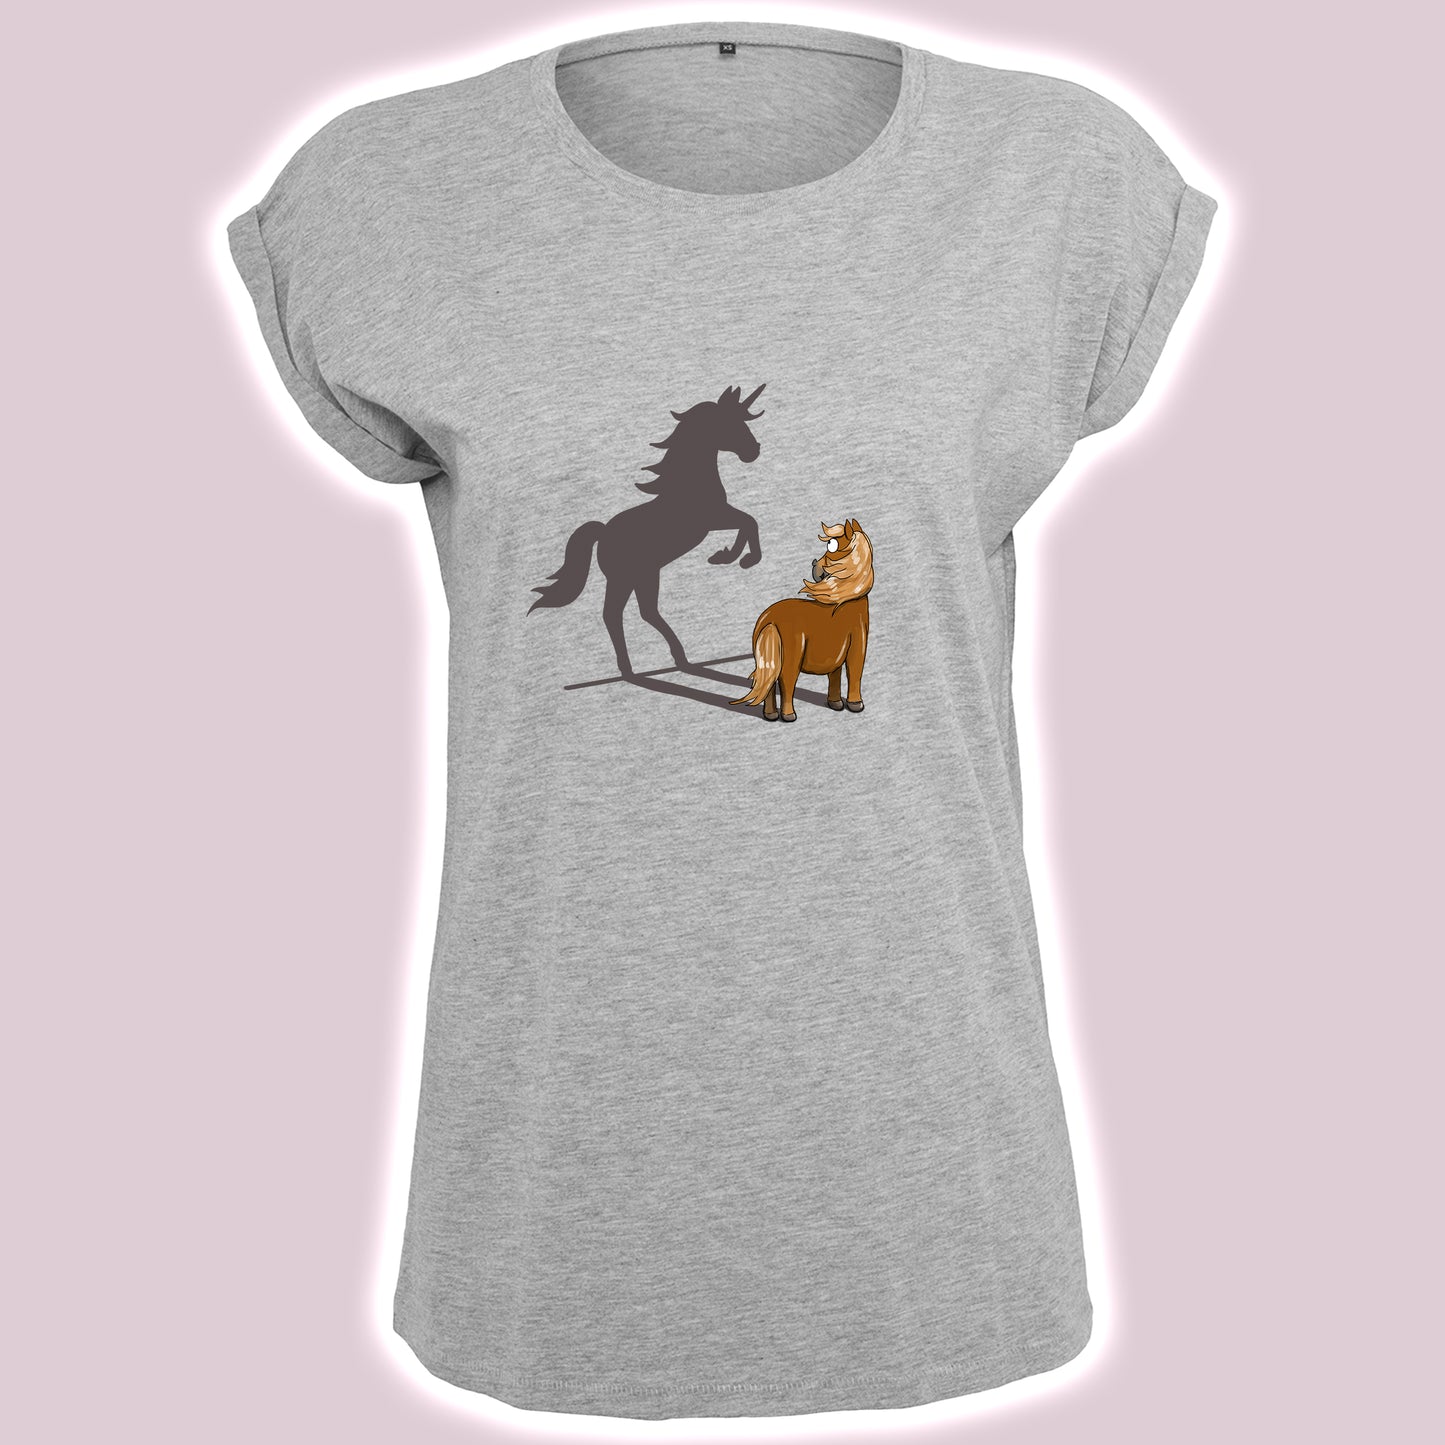 Equiboodle Emily Cole Hotshot T Shirt - Believe In Yourself - Flaxen Chestnut